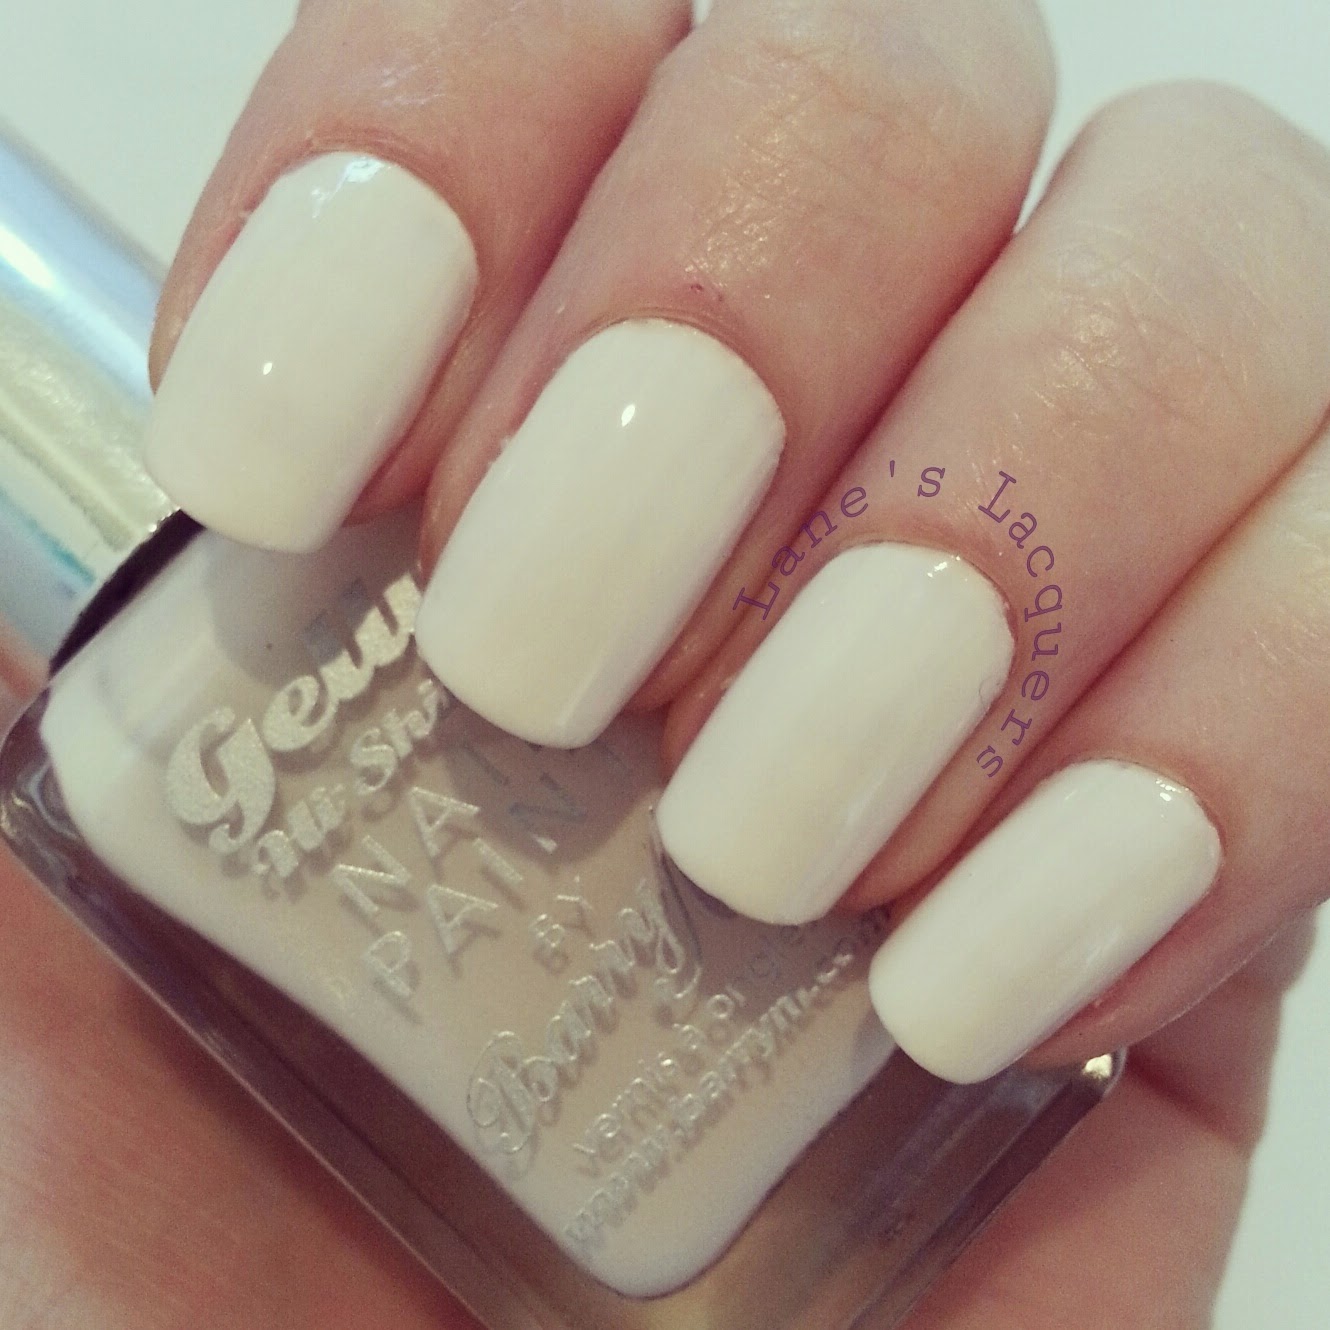 barry-m-summer-gelly-coconut-swatch-nails